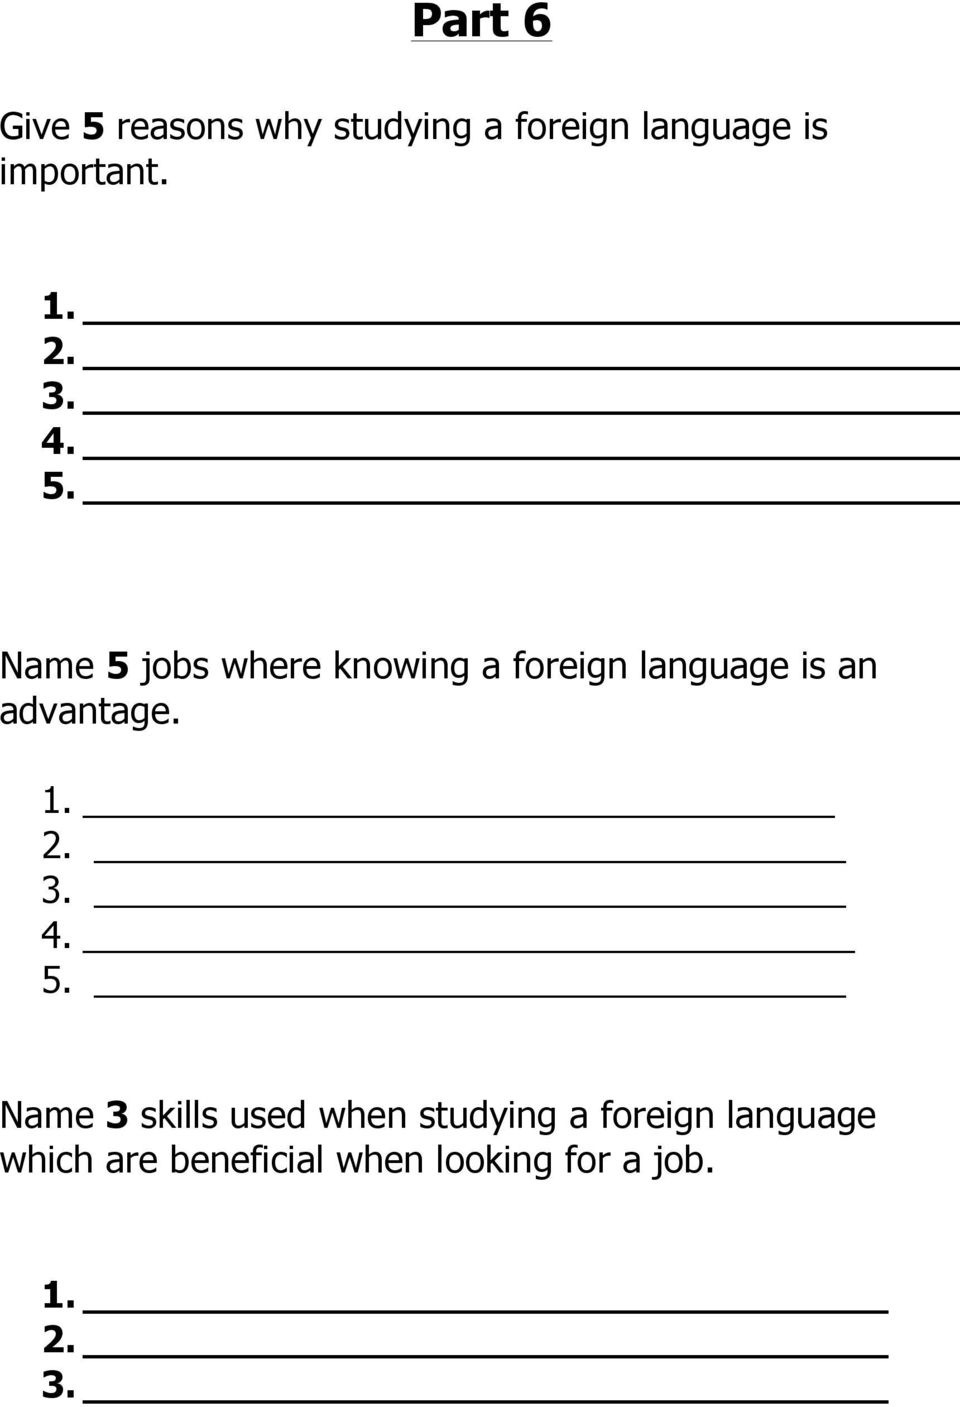 Name 5 jobs where knowing a foreign language is an advantage.